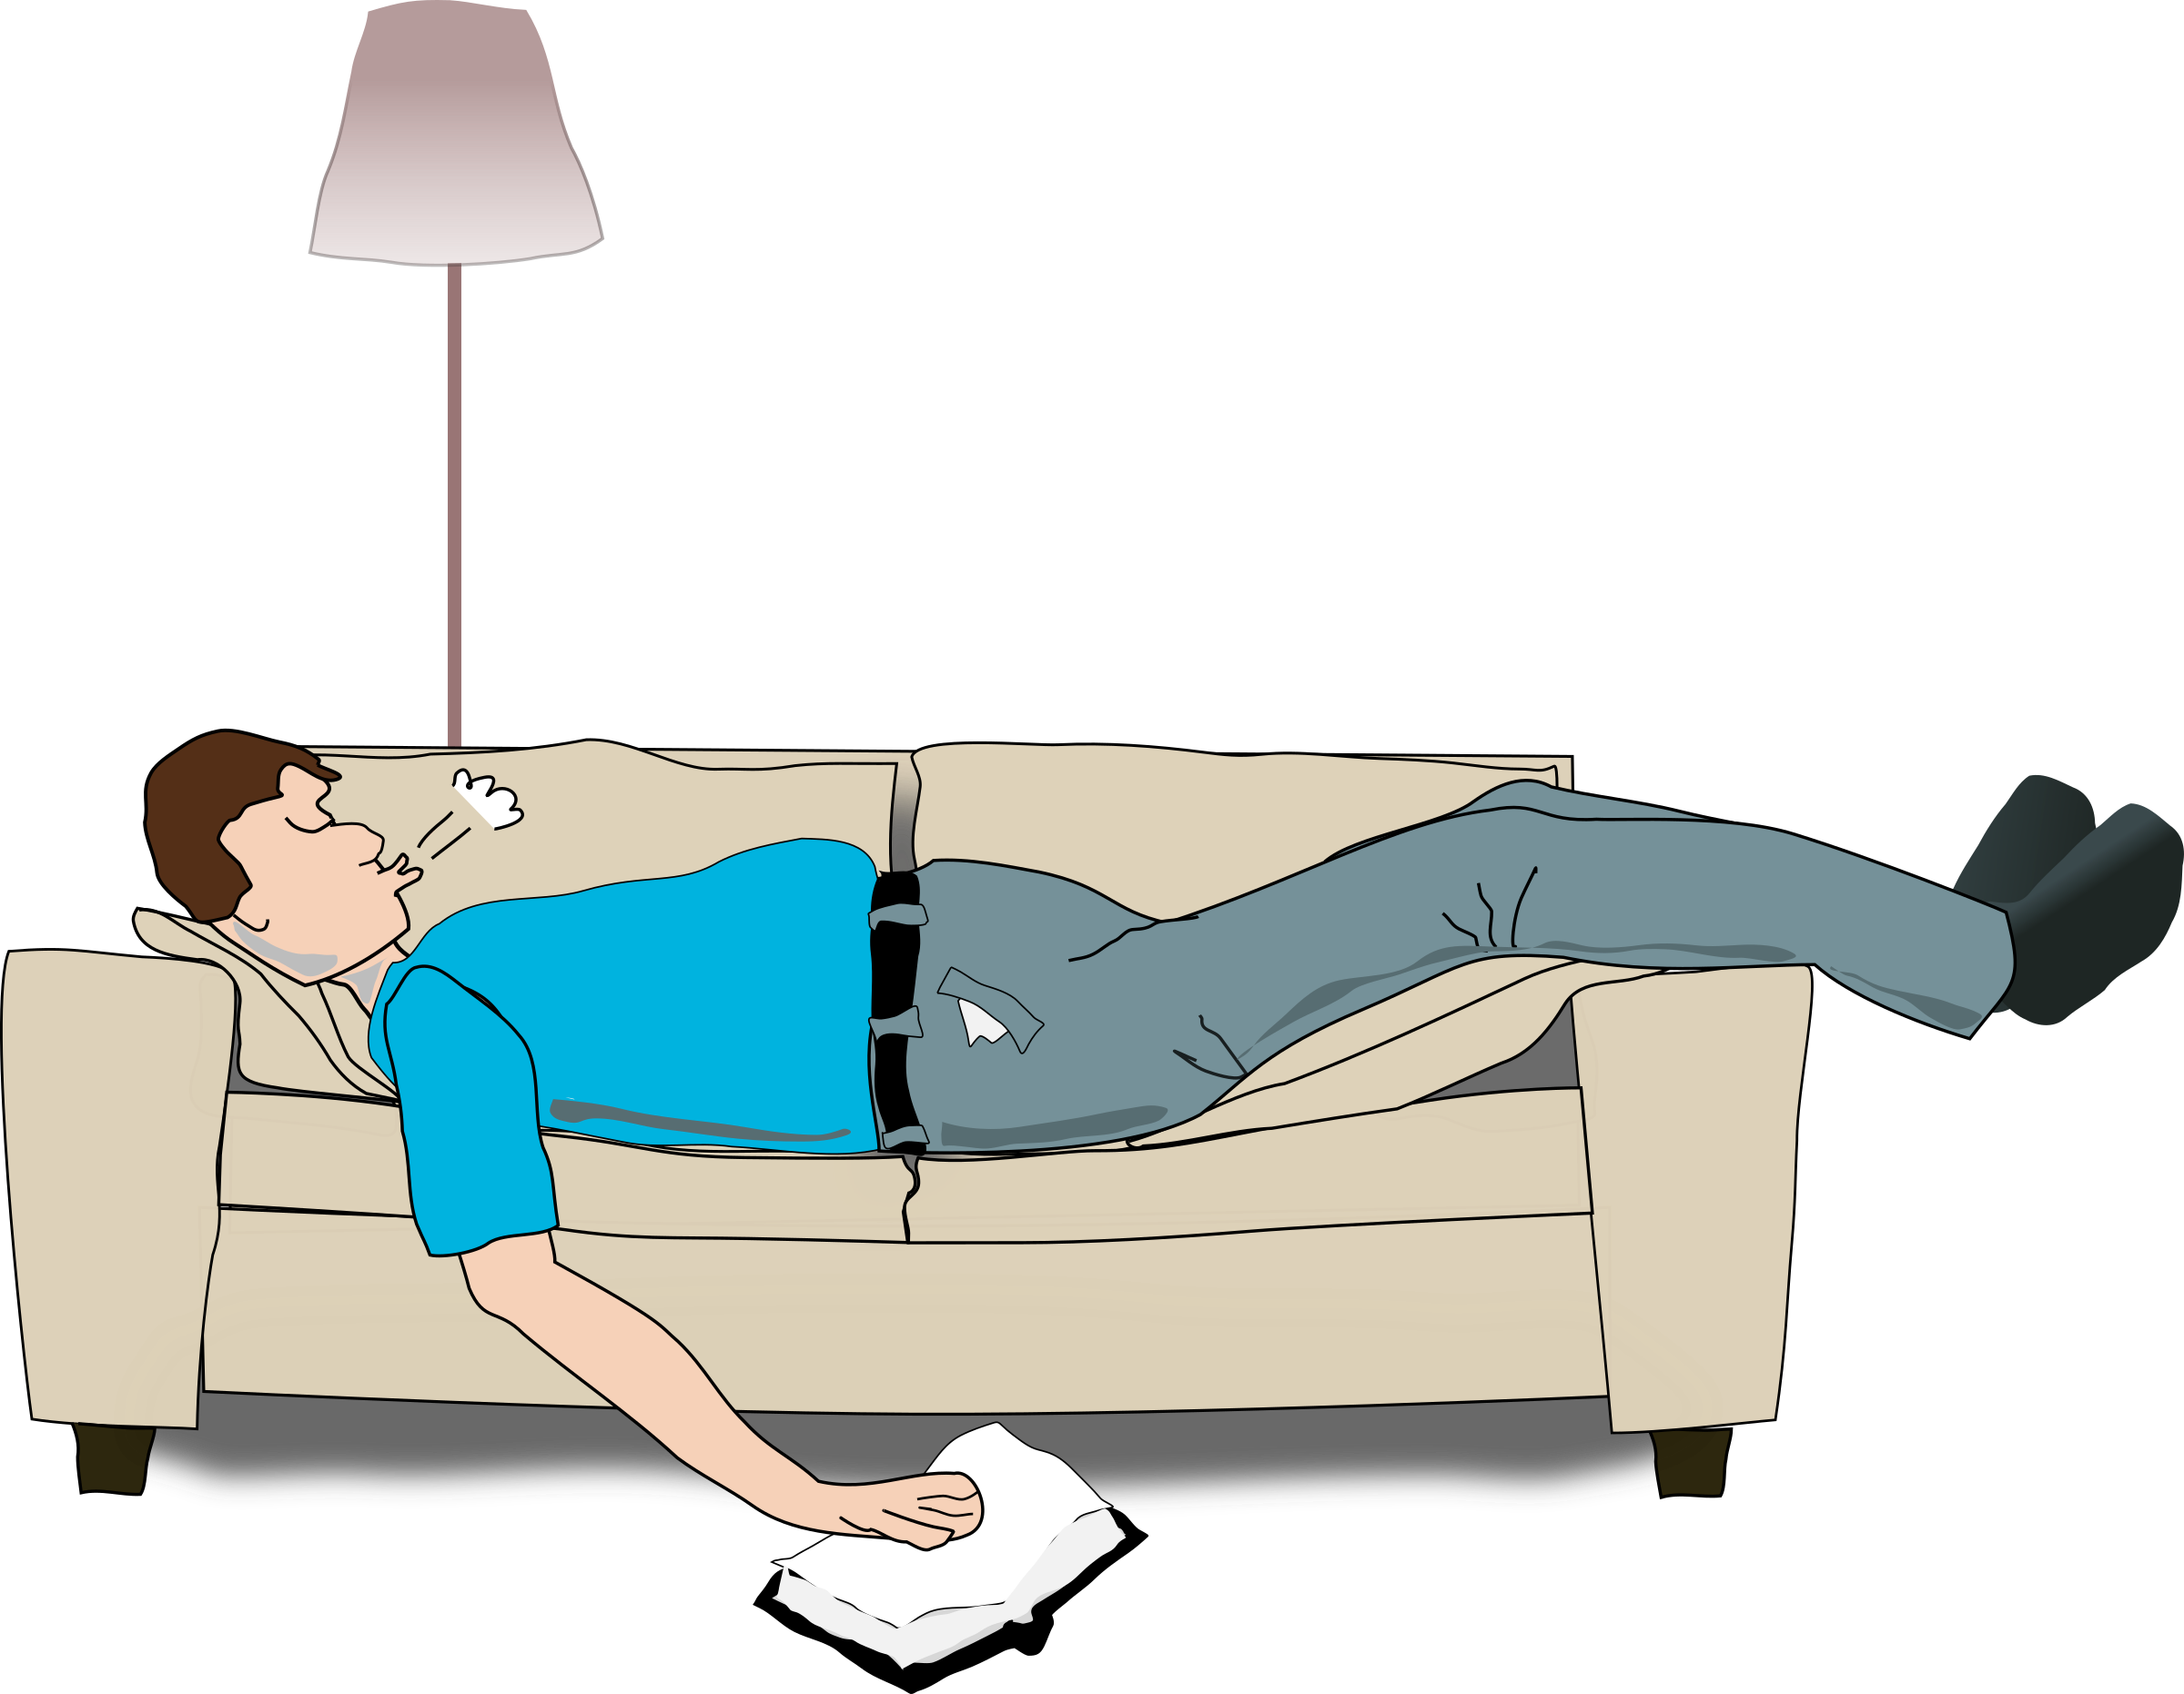 Man Sleeping on couch vector clipart image - Free stock photo - Public